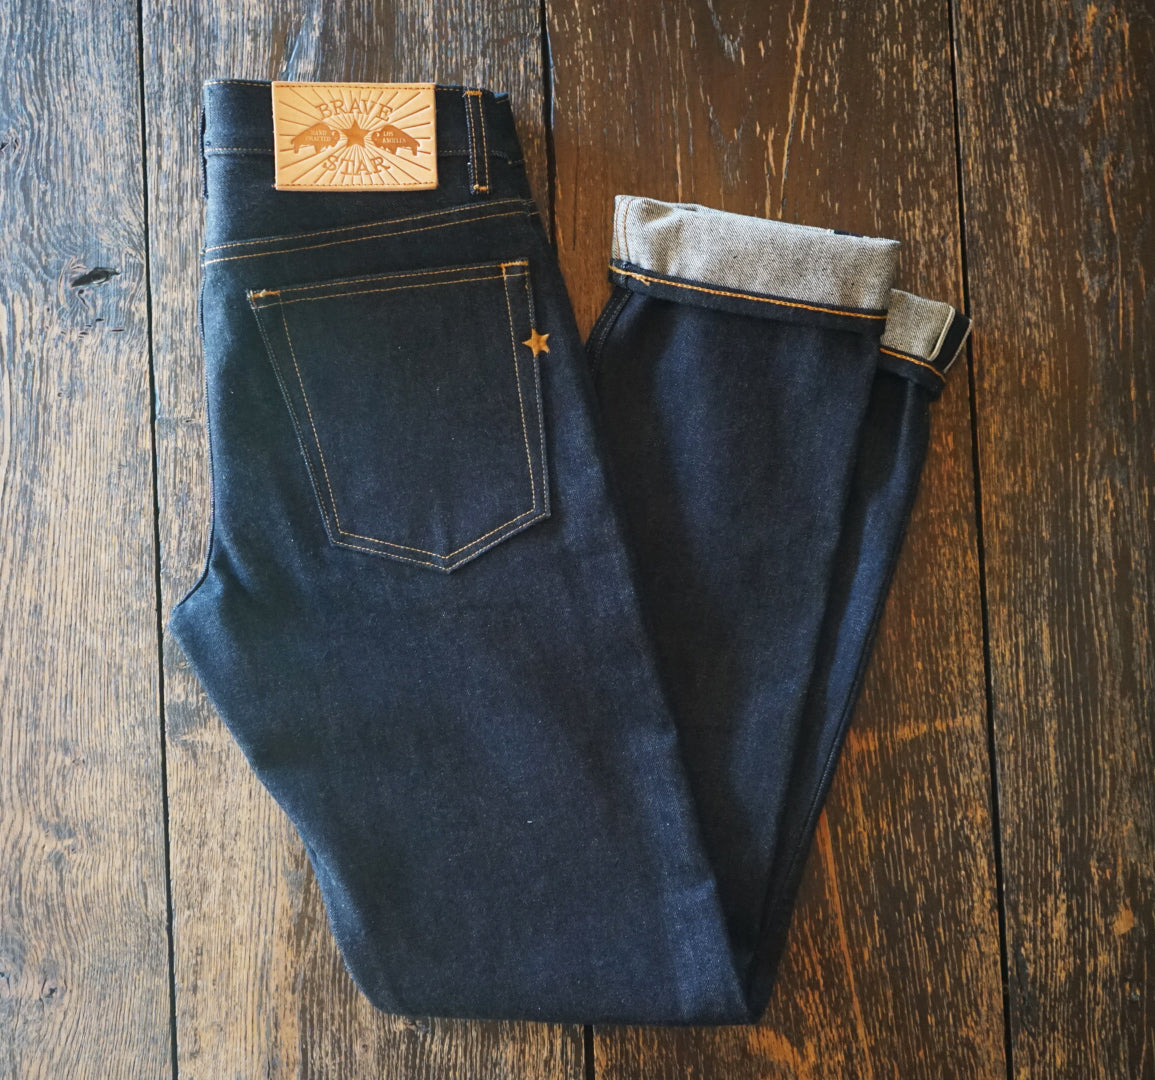 Brave Star Jeans 32x28 True Straight Selvage Denim Cotton made in